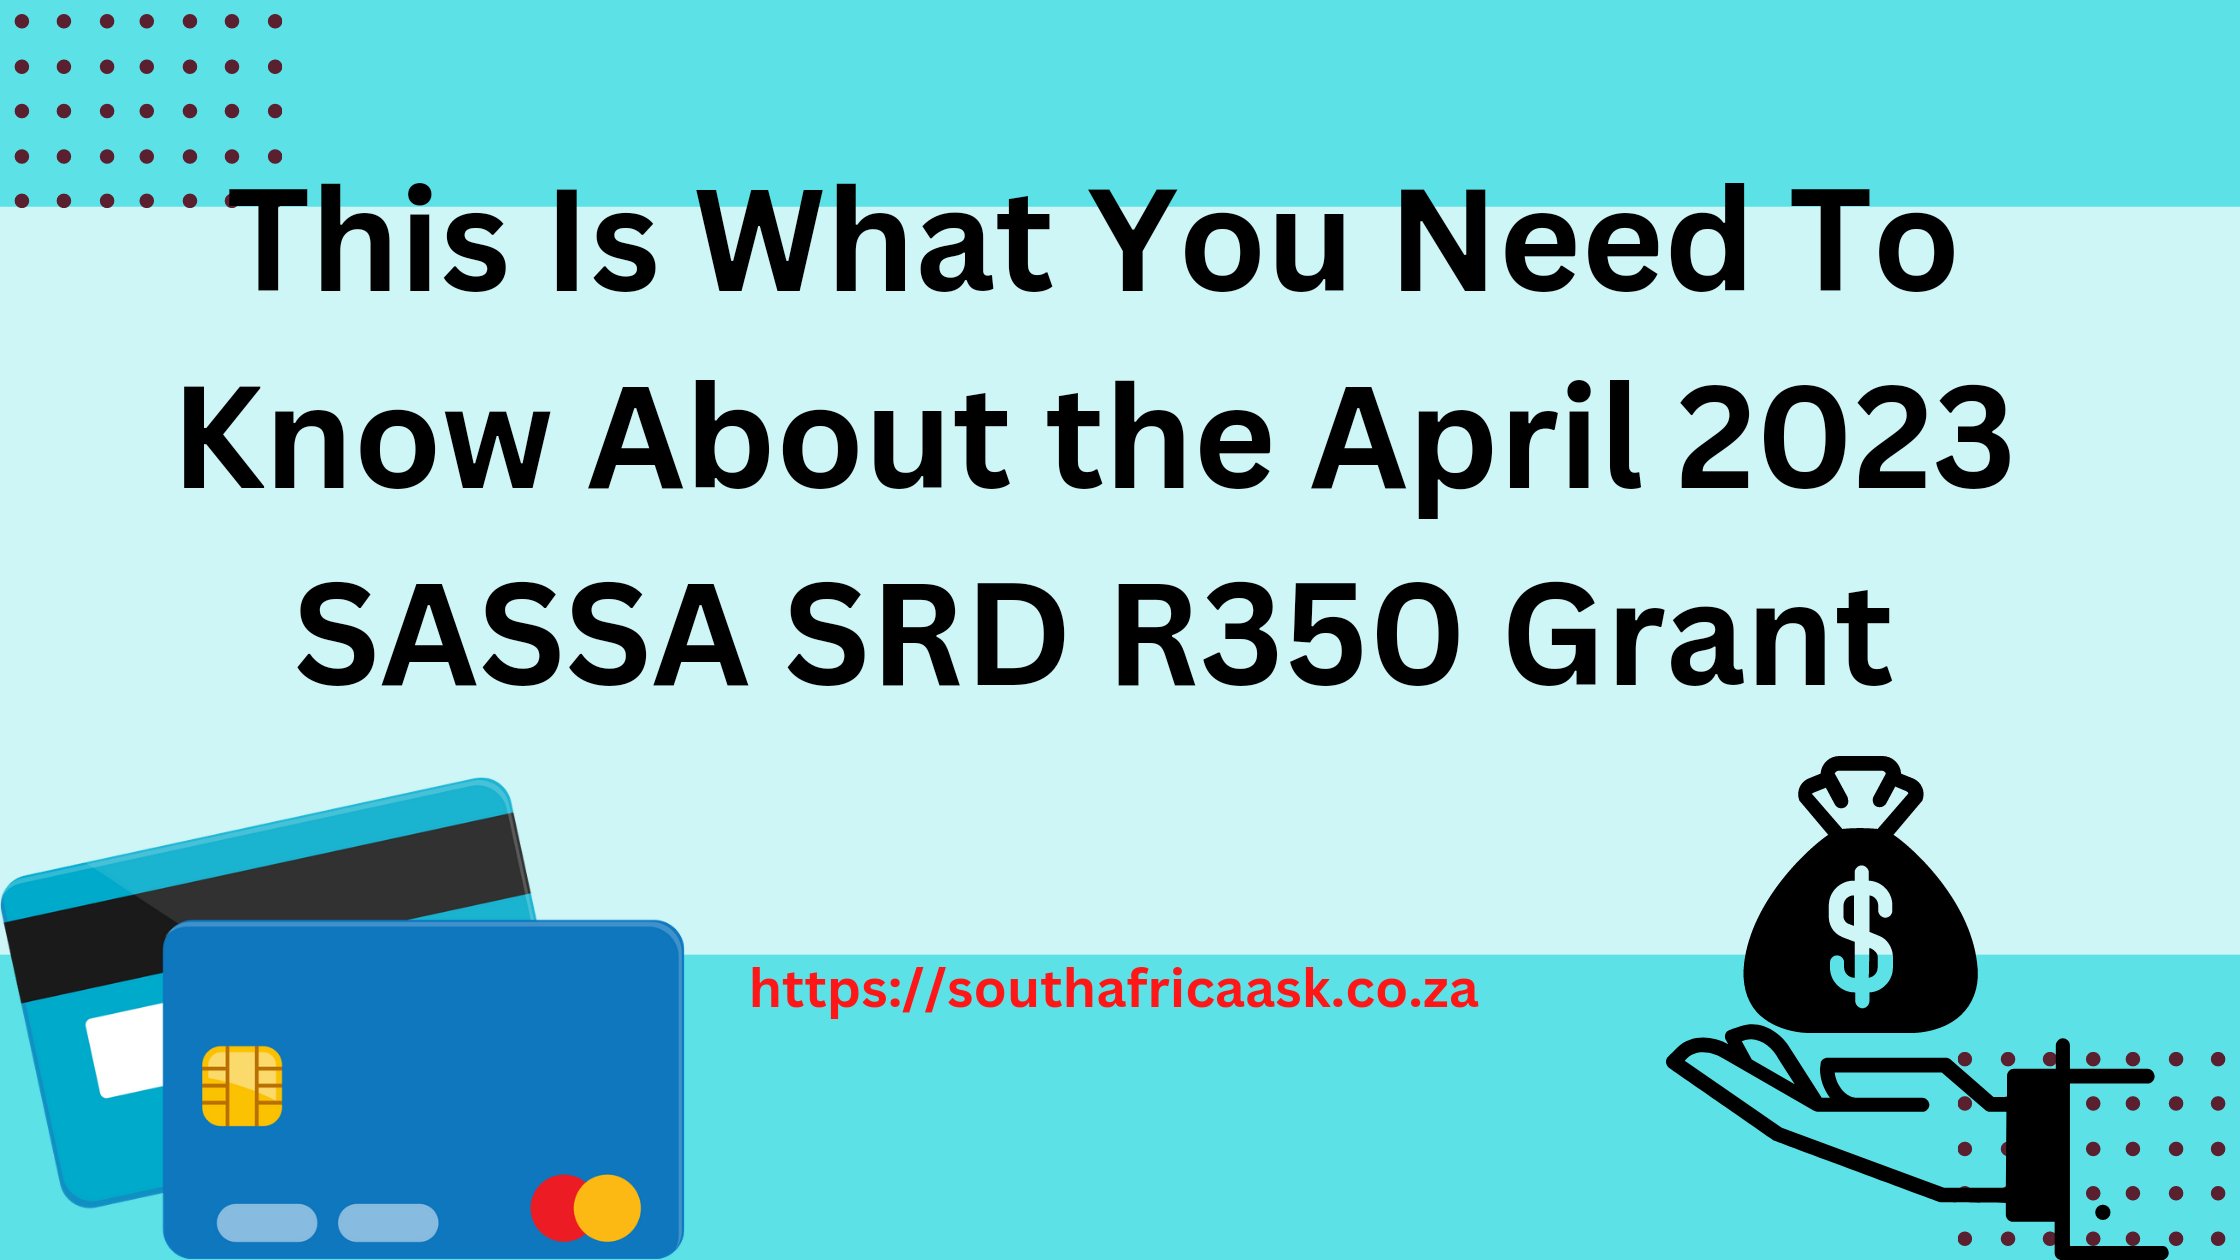 This Is What You Need To Know About the April 2023 SASSA SRD R350 Grant